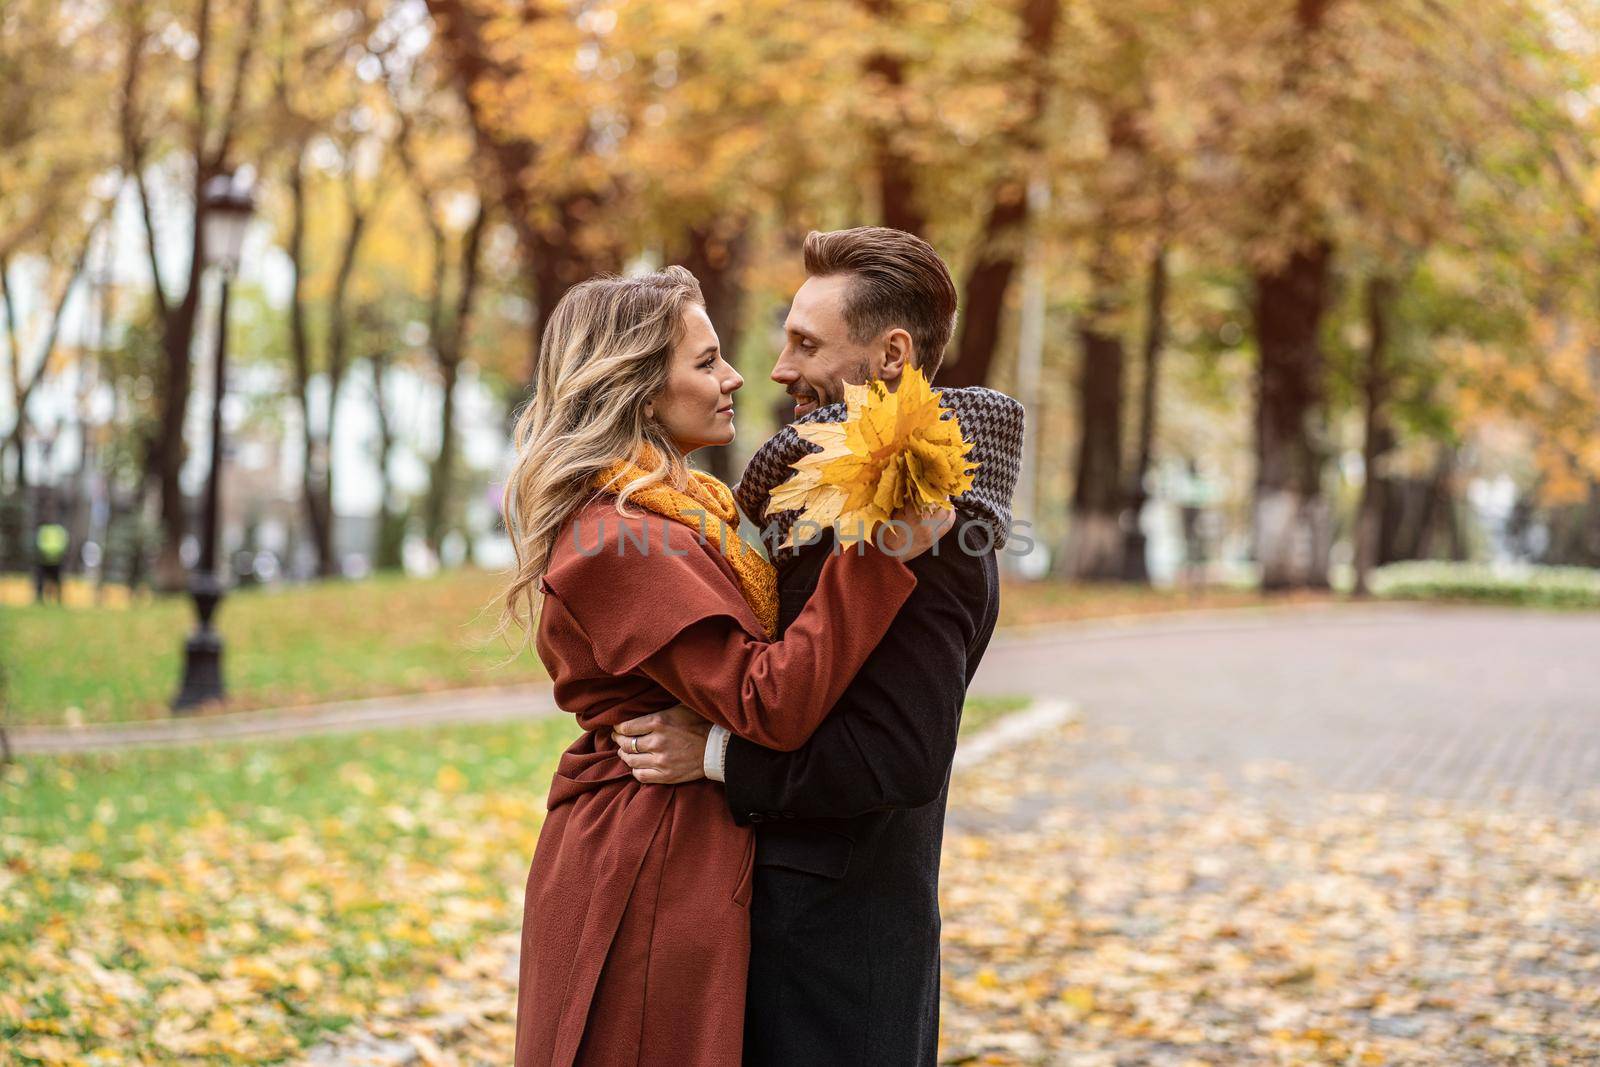 About a kiss shot. Husband and a wife hugged smile looking at each other in the autumn park. Outdoor shot of a young couple in love having great time having a hug in a autumn park.  by LipikStockMedia